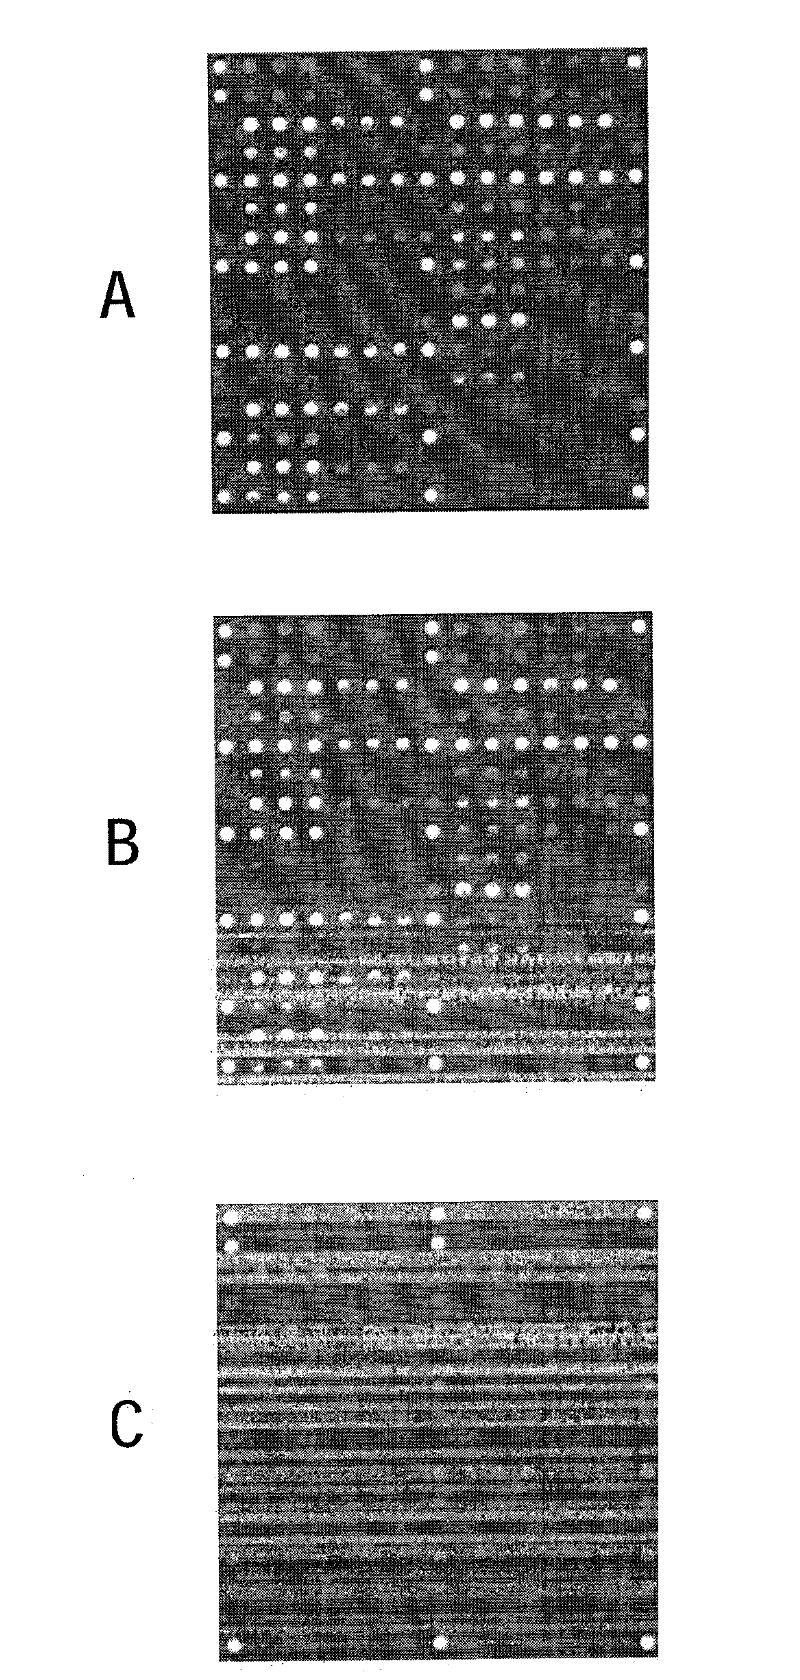 Method for concentrating sample constituents and amplifying nucleic acids